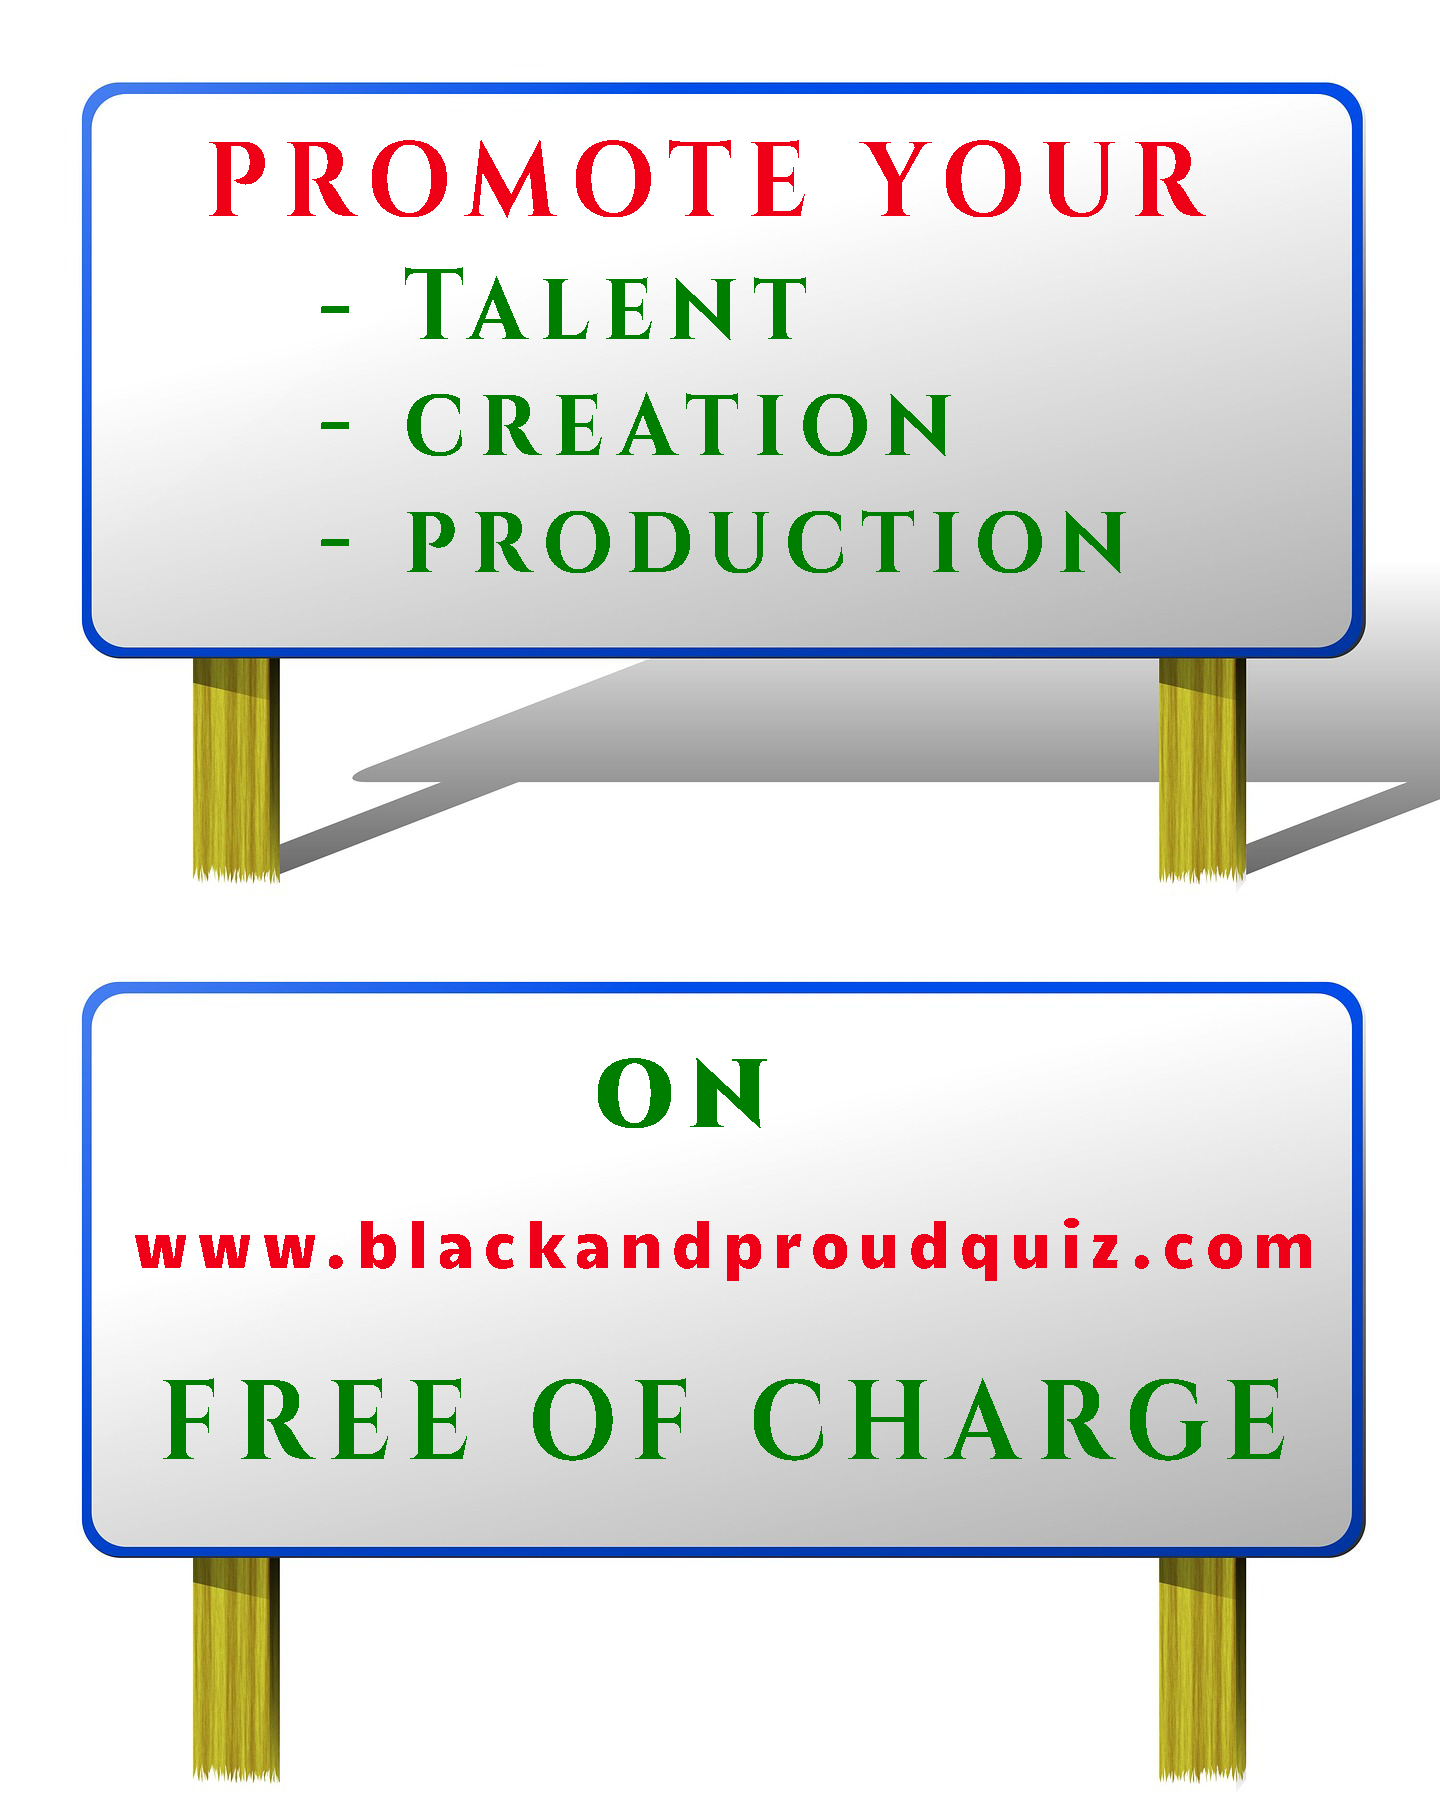 Promote your work here